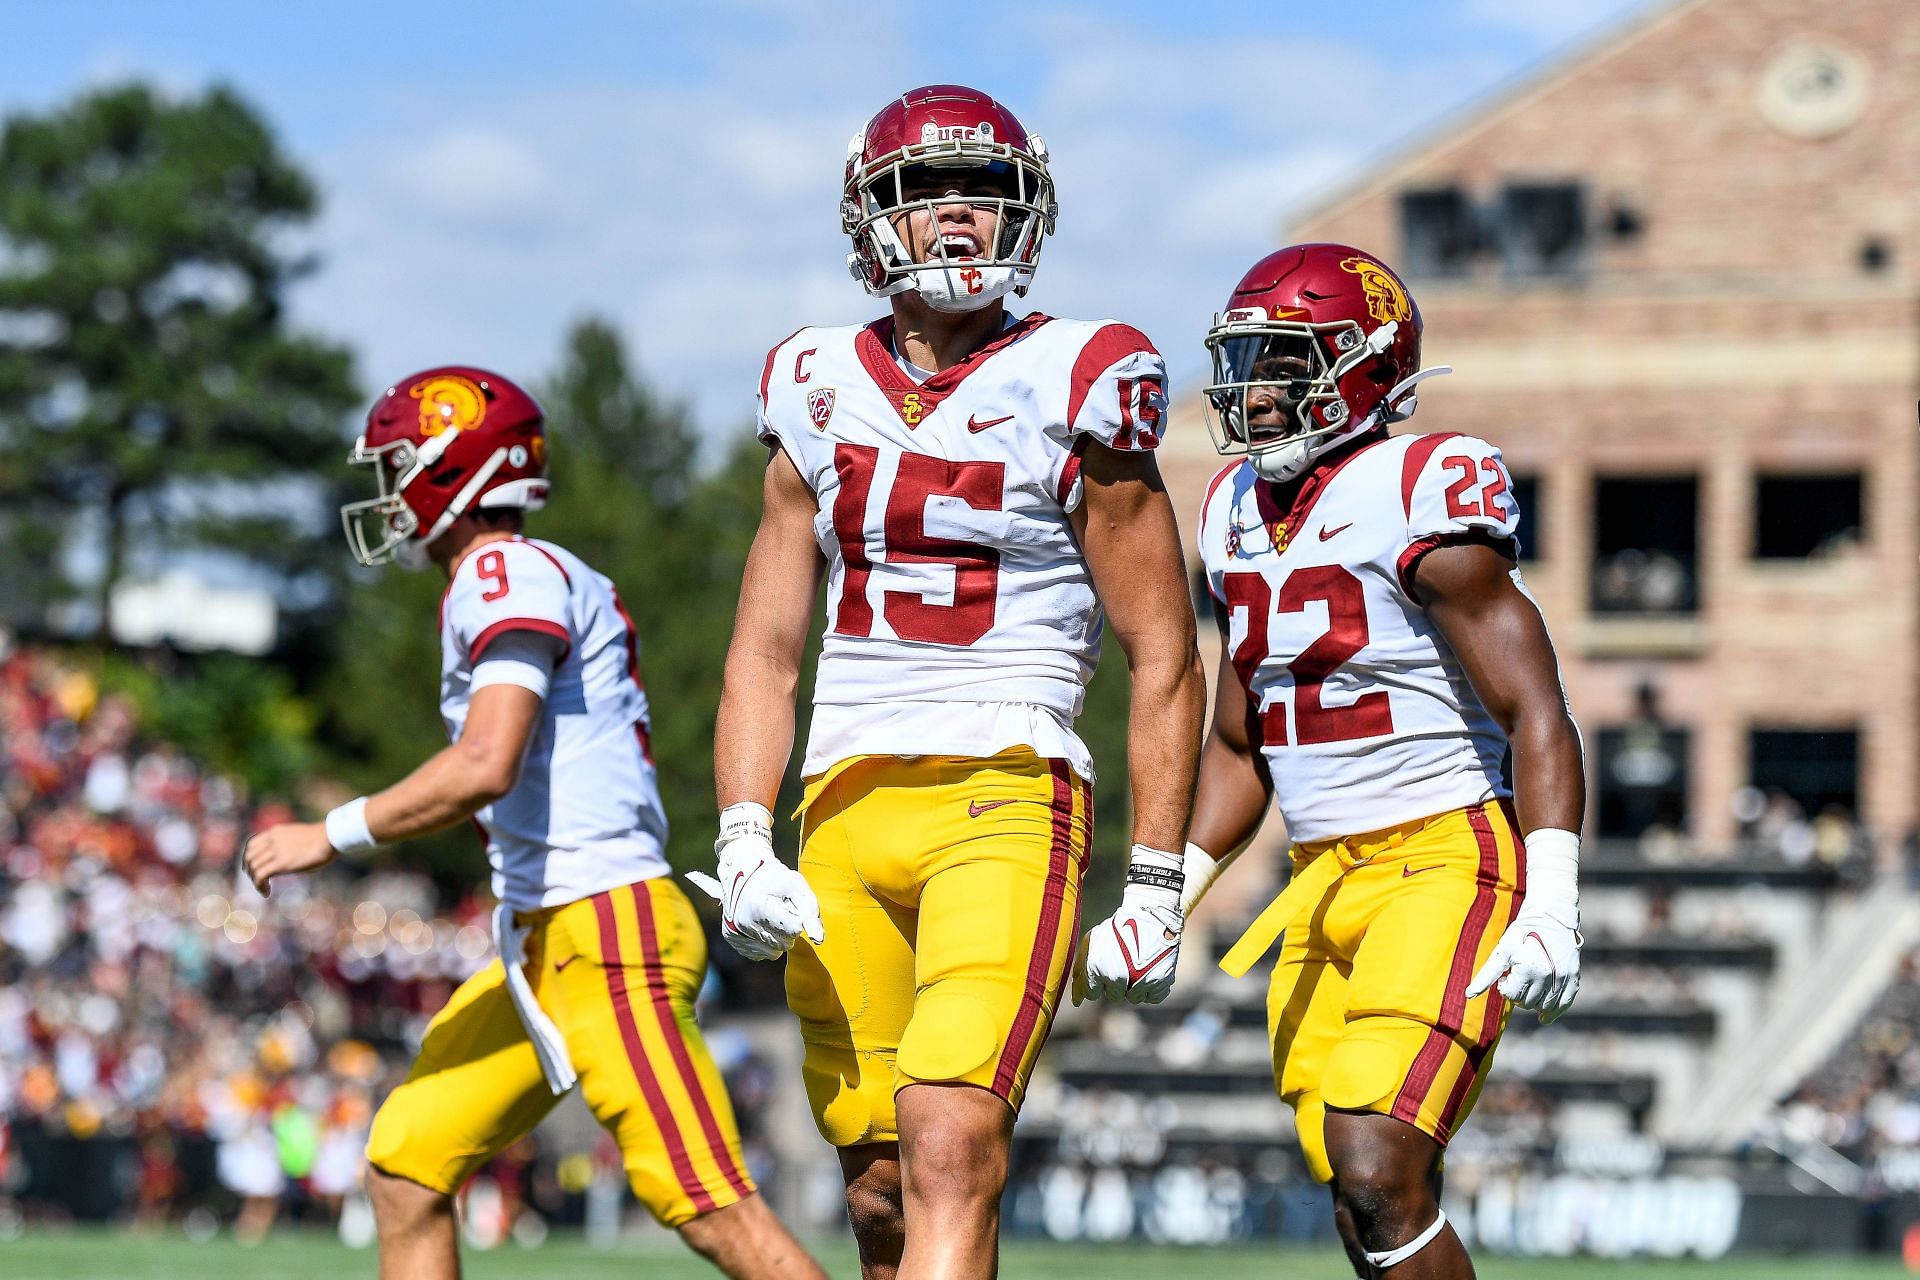 Wide receiver Drake London #15 of the USC Trojans celebrates after a first quarter touchdown catch against the Colorado Buffaloes at Folsom Field on October 2, 2021 in Boulder, Colorado.